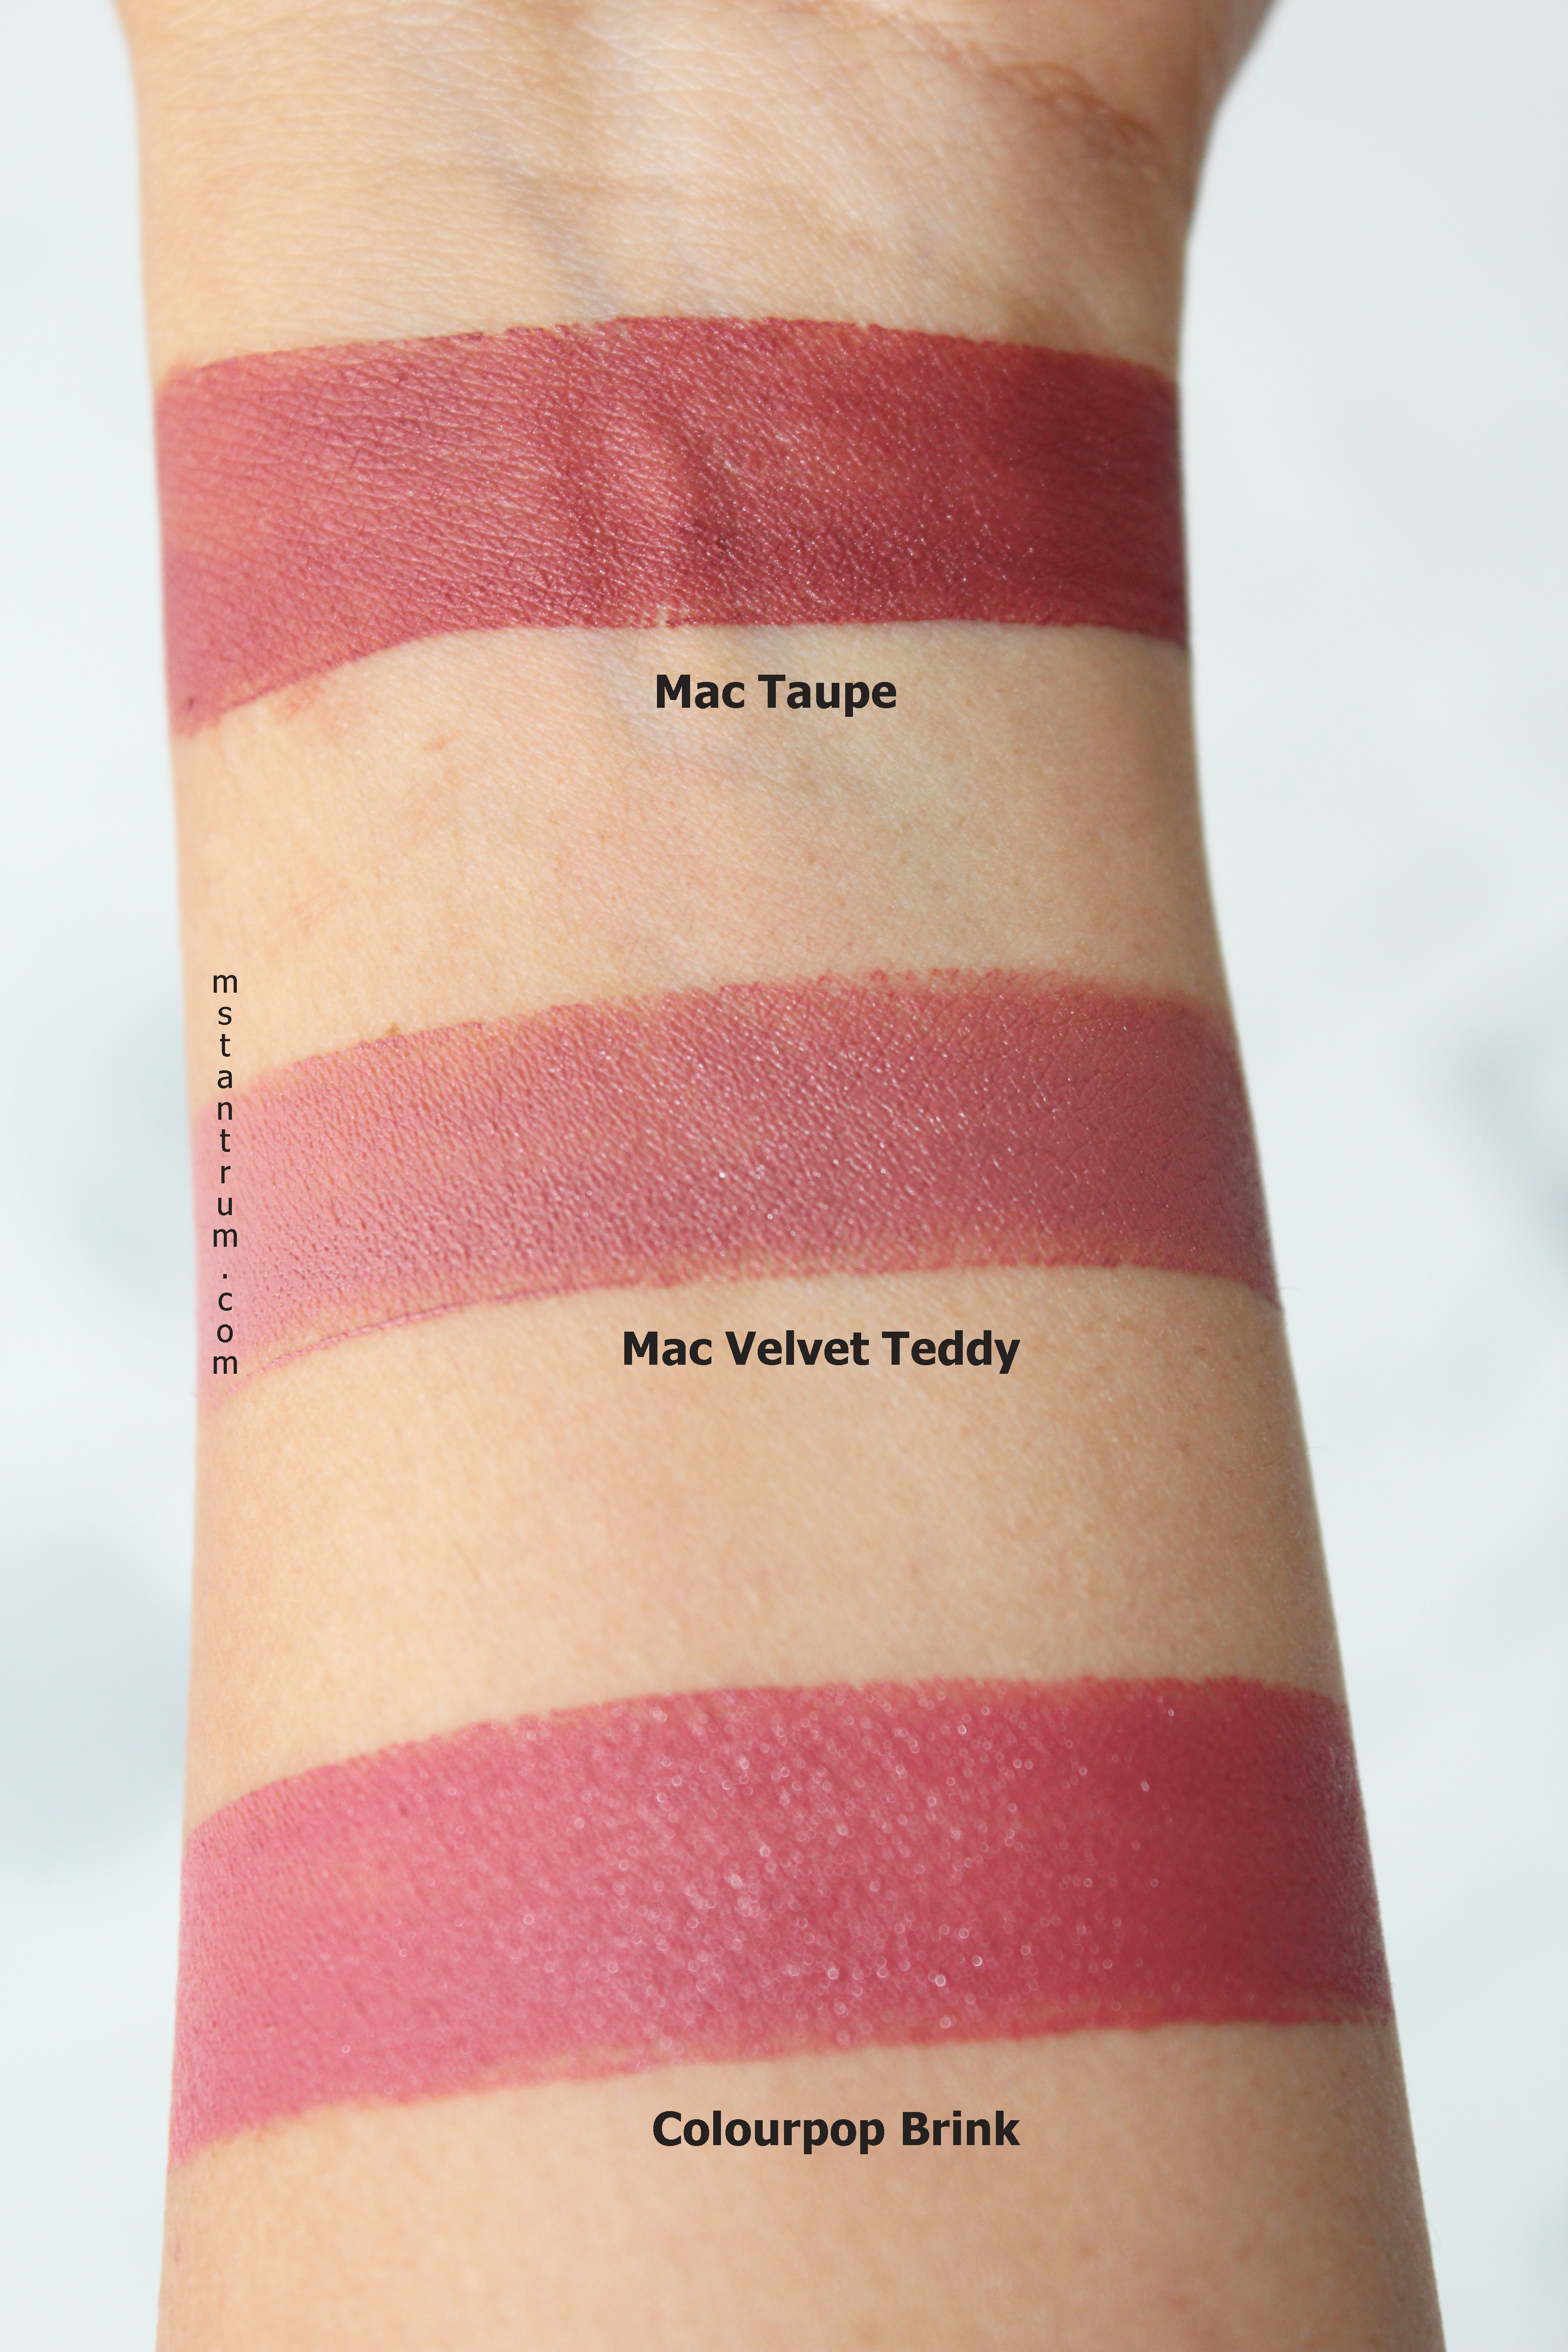 Summer to Fall Transition lipsticks swatches